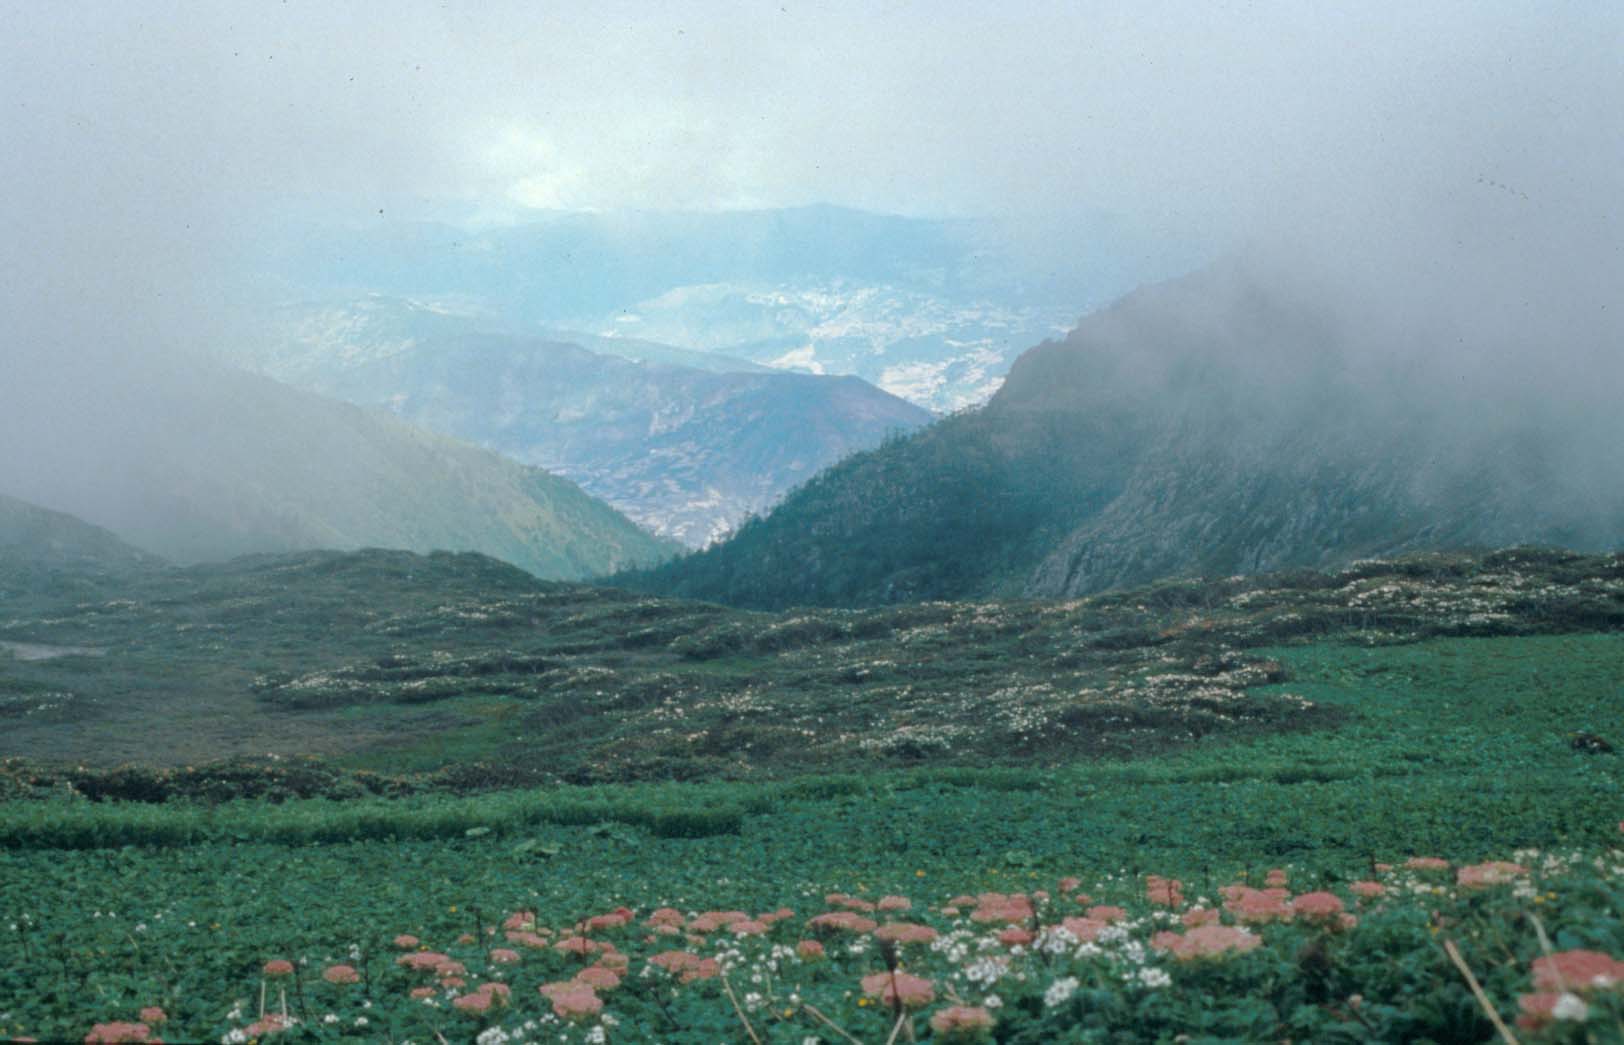 Clouds parting over mountain meadow and Mekong Valley, Zhiziluo